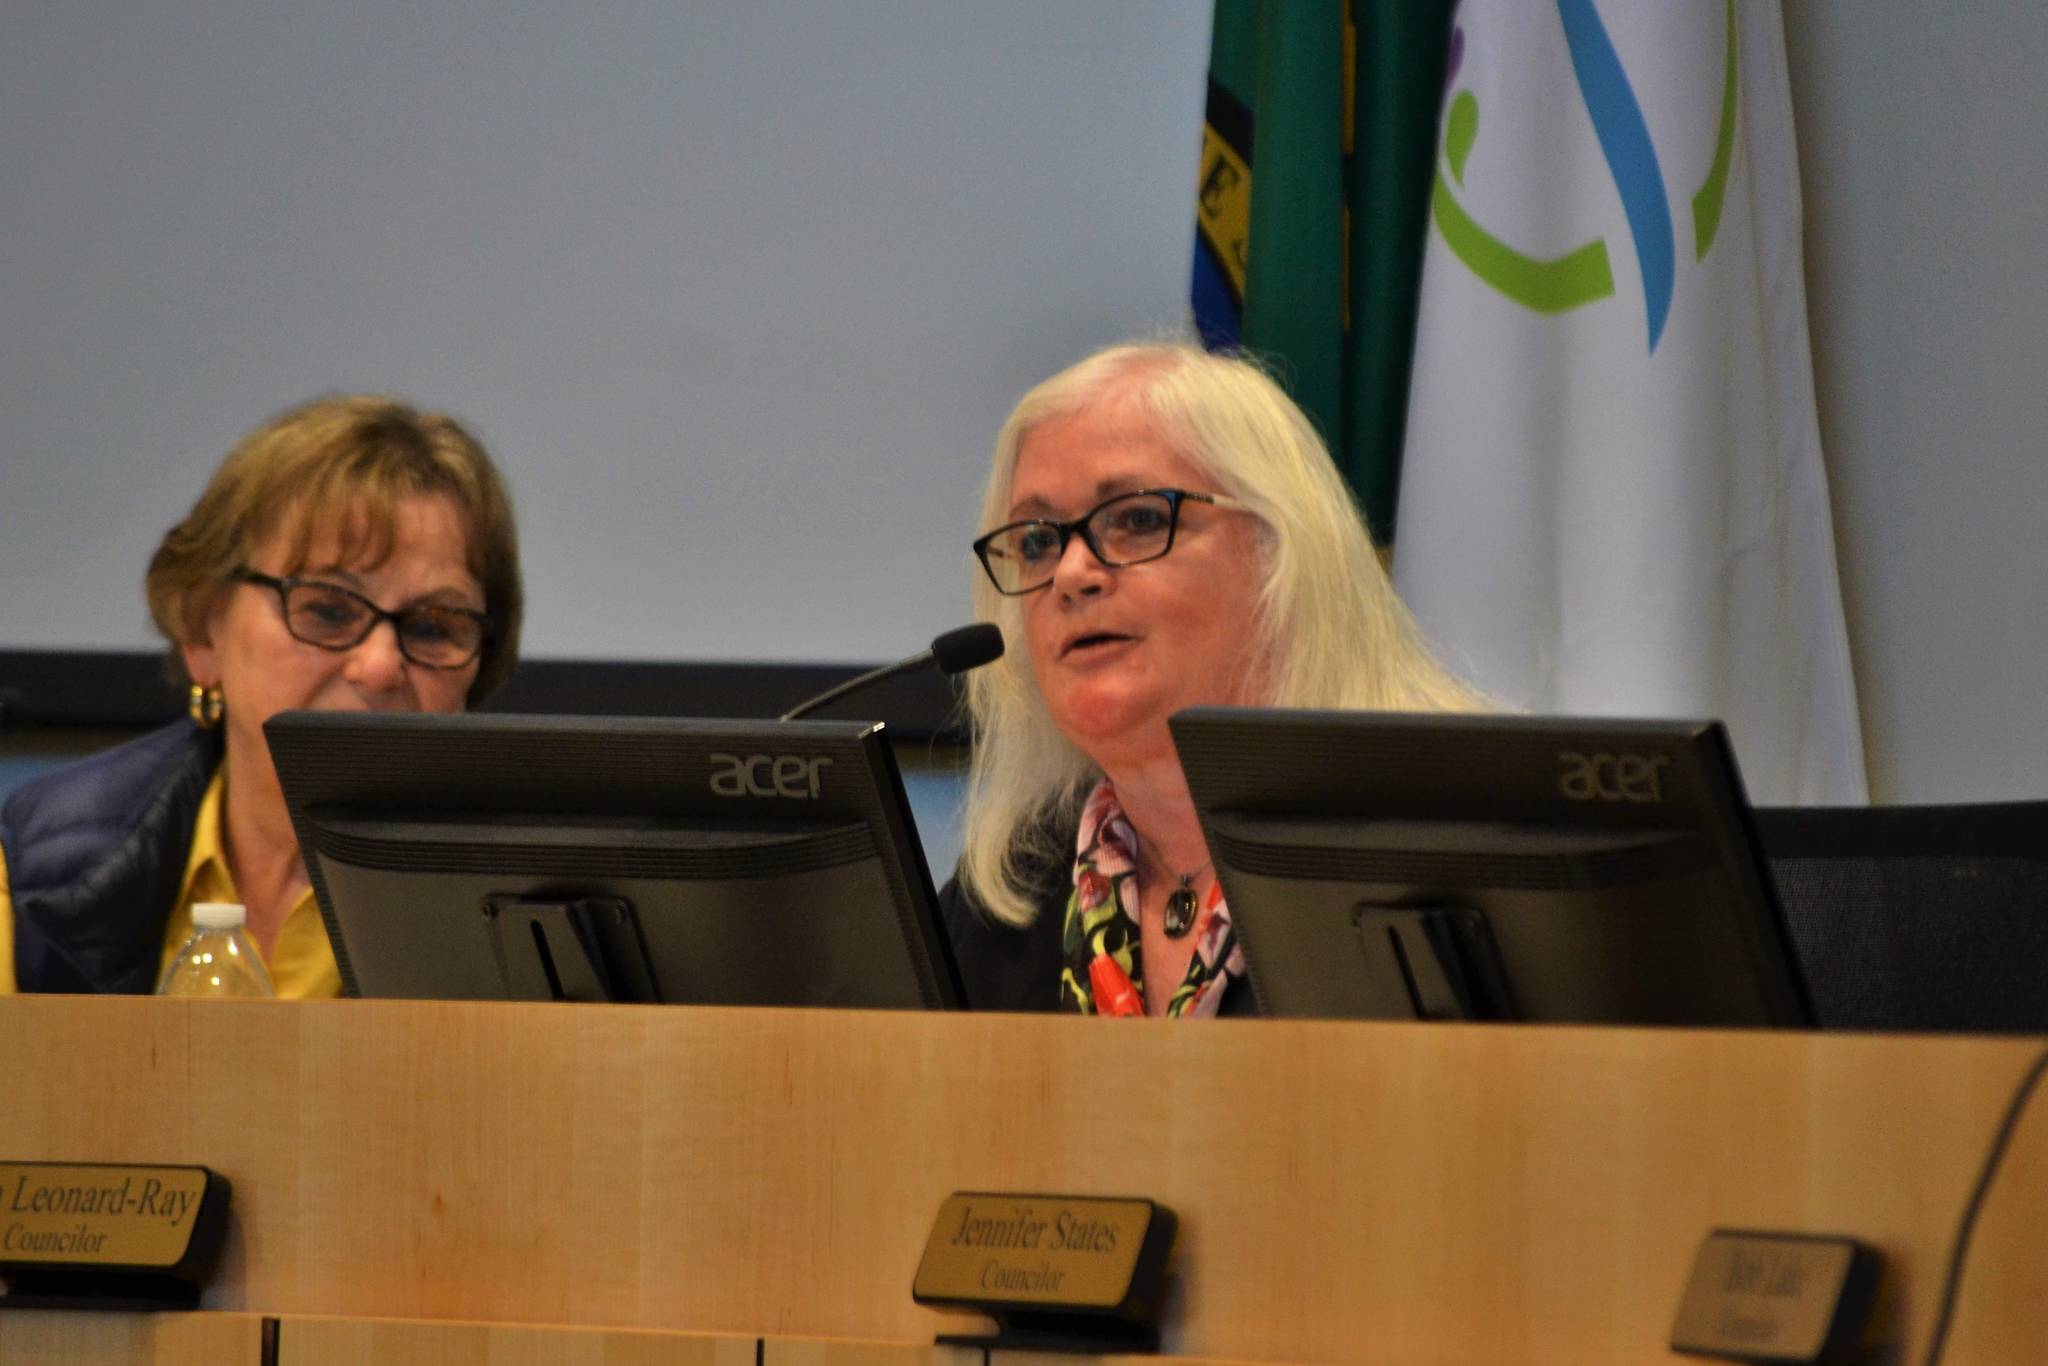 On May 14, Pam Leonard-Ray, right, announced her resignation from the Sequim City Council. Now, applications for her position are open through 9 a.m. Friday, July 13. Applicants will be interviewed on July 23 by city councilors with an appointee possibly selected and sworn in that night. Sequim Gazette file photo by Matthew Nash